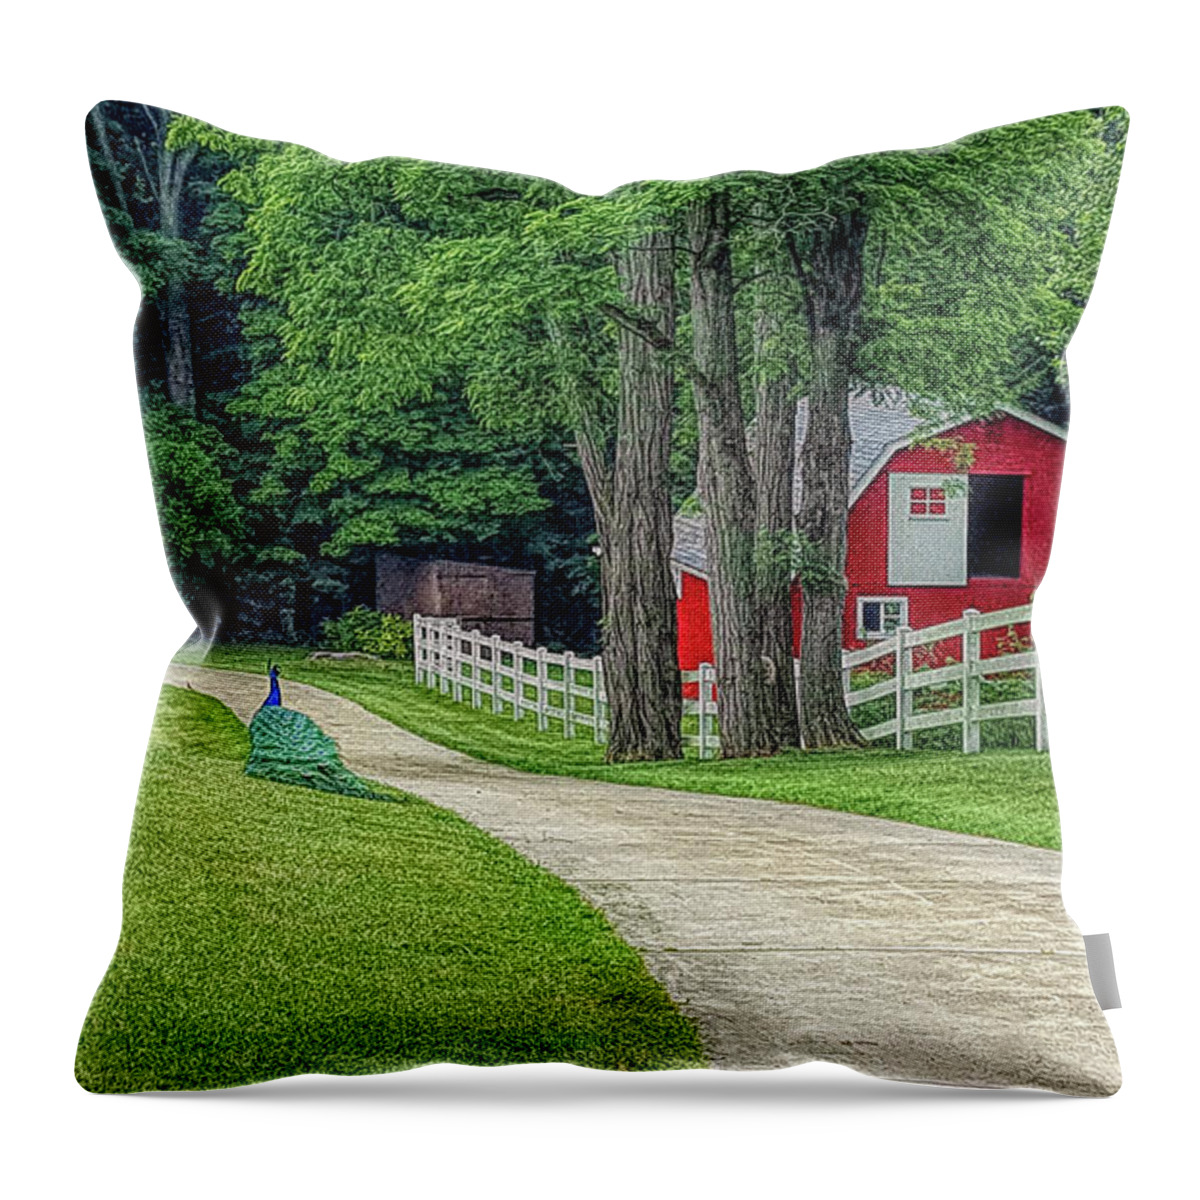 Peacock Throw Pillow featuring the photograph Peacock Ranch by Mary Timman